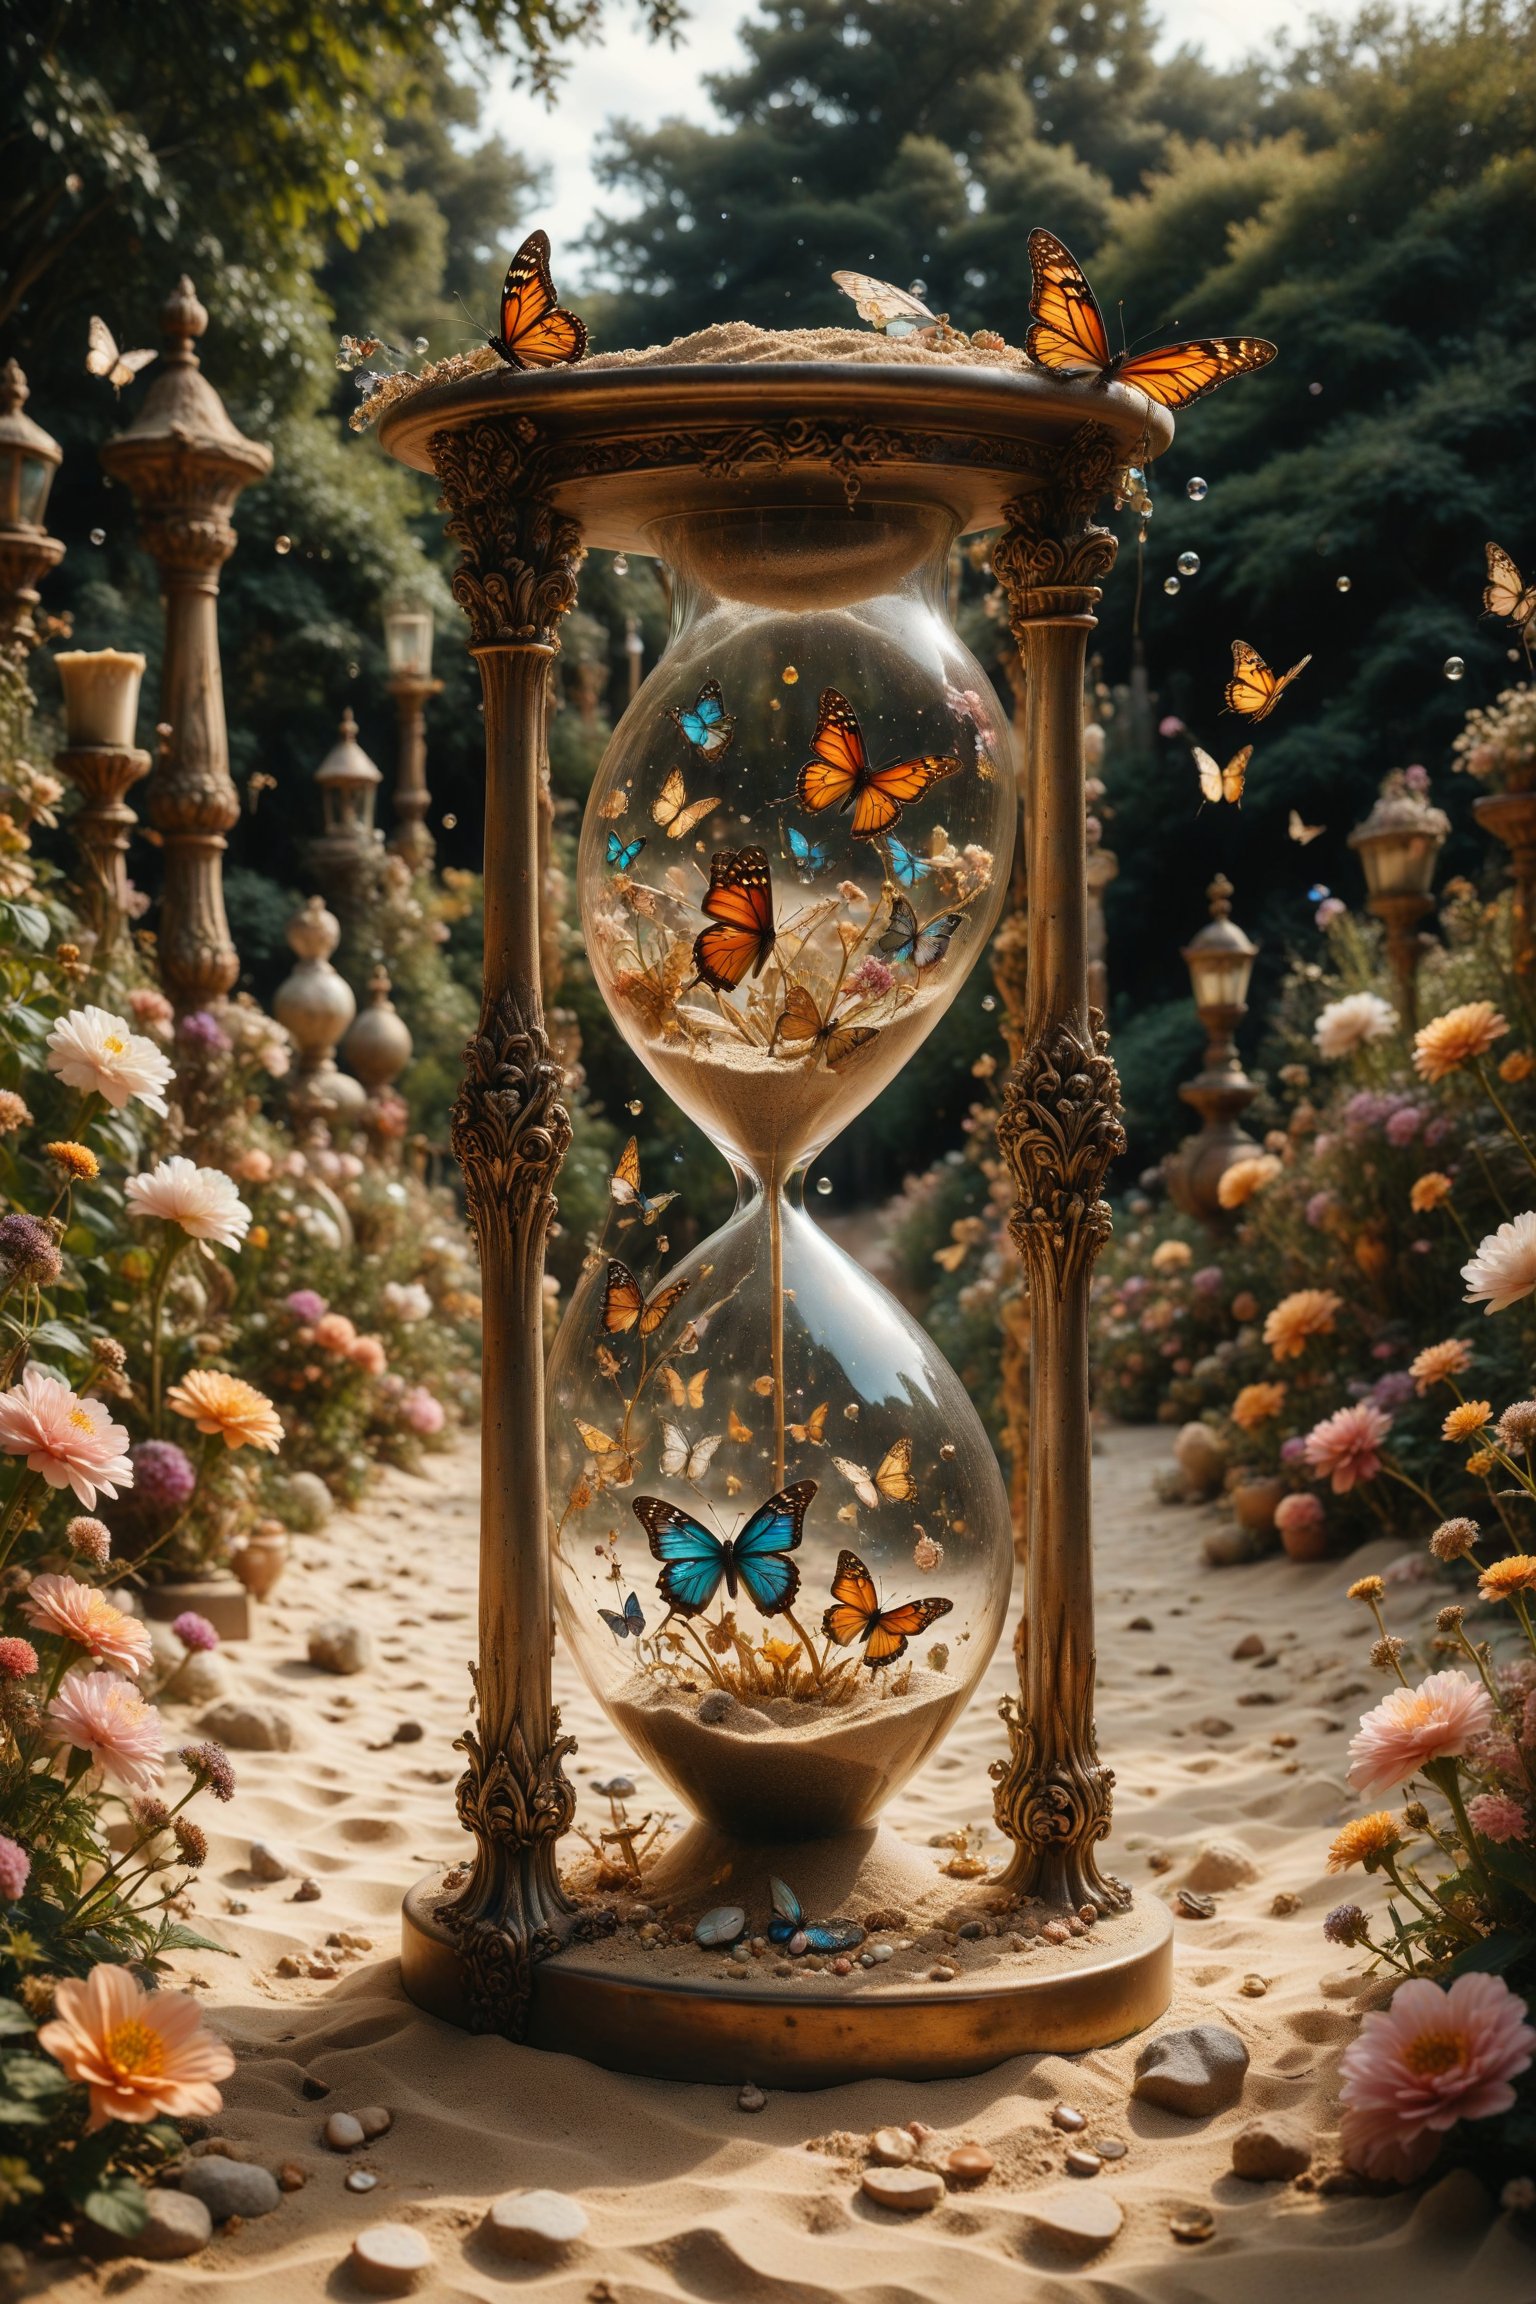 An hourglass with interesting, surreal organic curves, in a garden where sand flows among living butterfly flowers, with candelabras resembling butterfly wings. Inlaid butterfly gardens, decorative gold accents, feathers, diamonds, and iridescent bubbles.